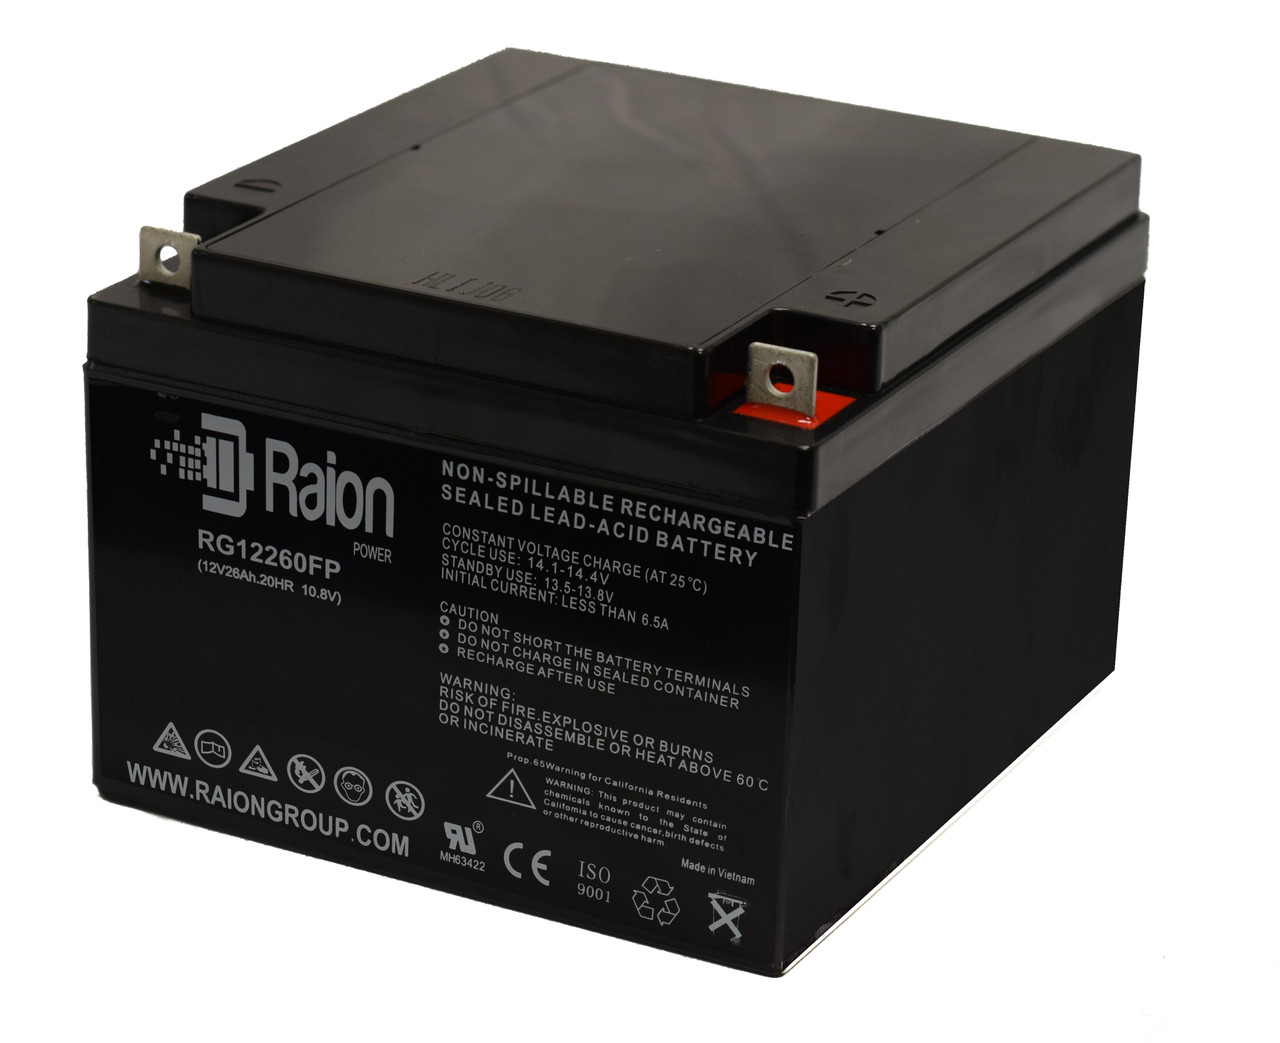 Raion Power Replacement 12V 26Ah Battery for PM PM12260 - 1 Pack